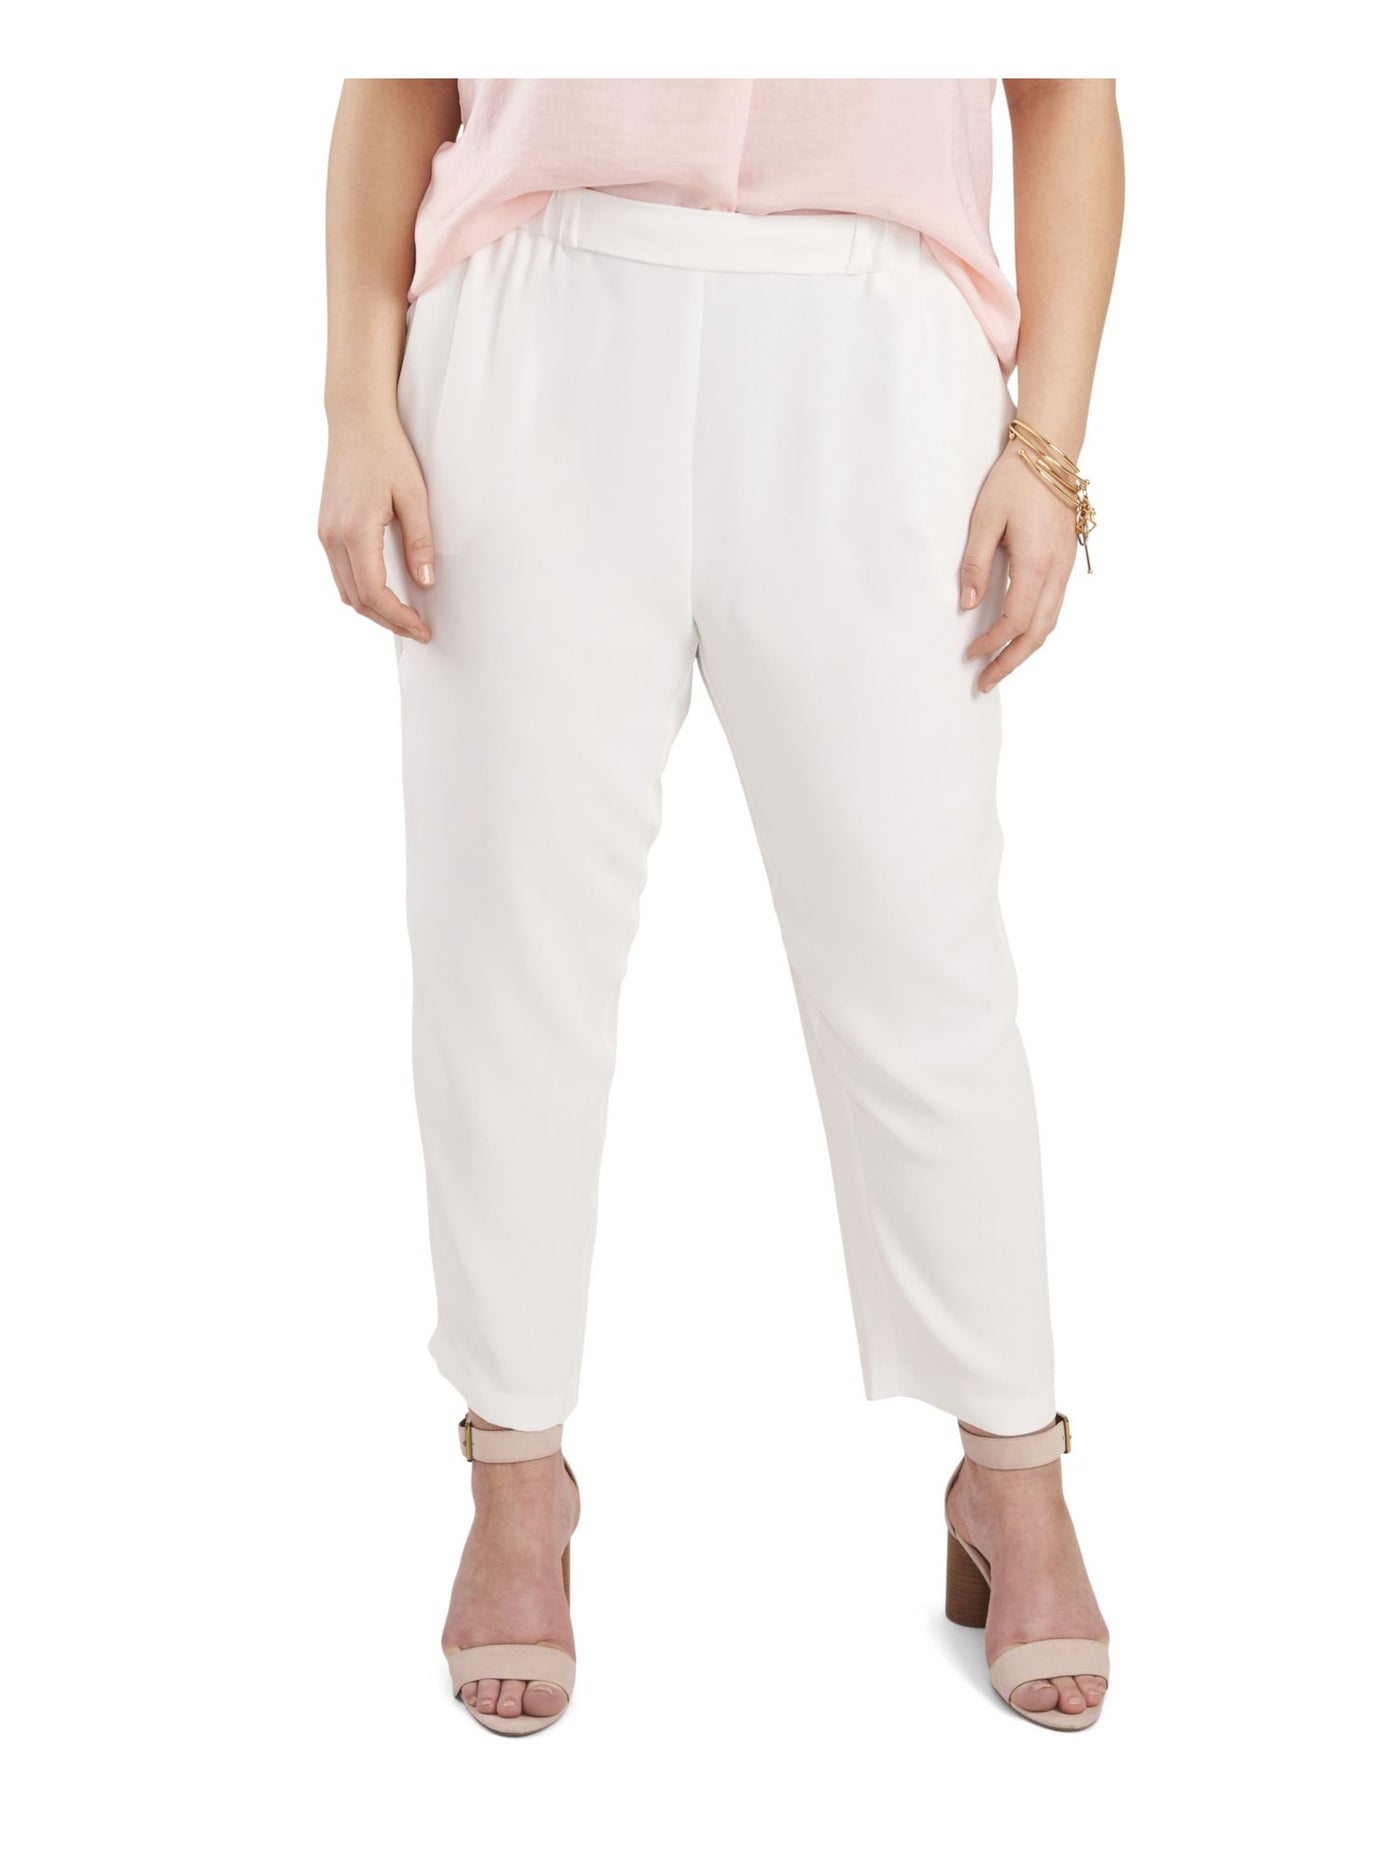 VINCE CAMUTO Womens White Stretch Pocketed Pull On Wear To Work Straight leg Pants Plus 1X